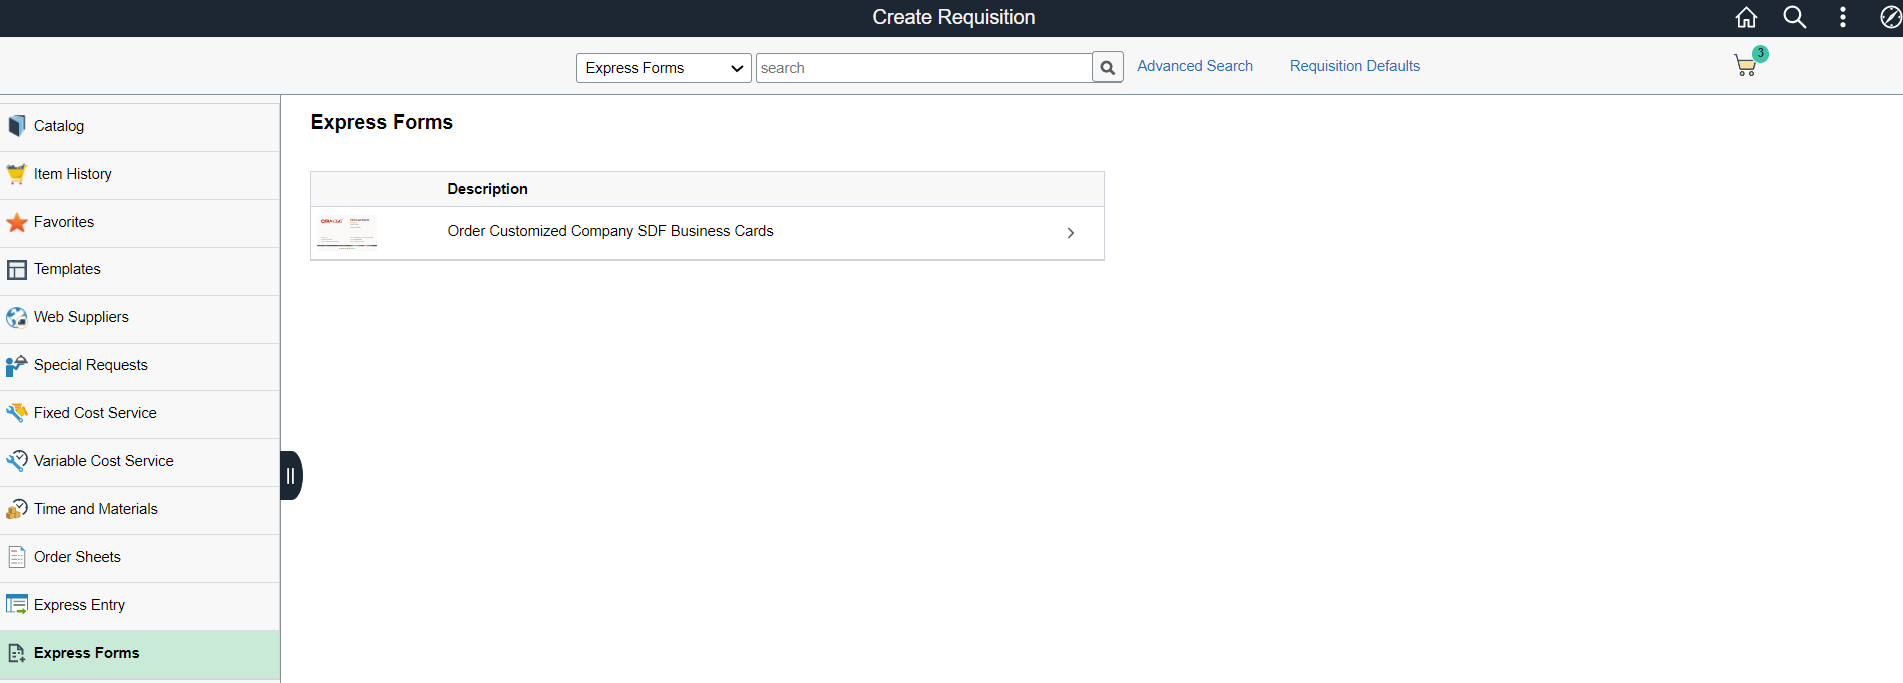 Create Requisition- Express Forms